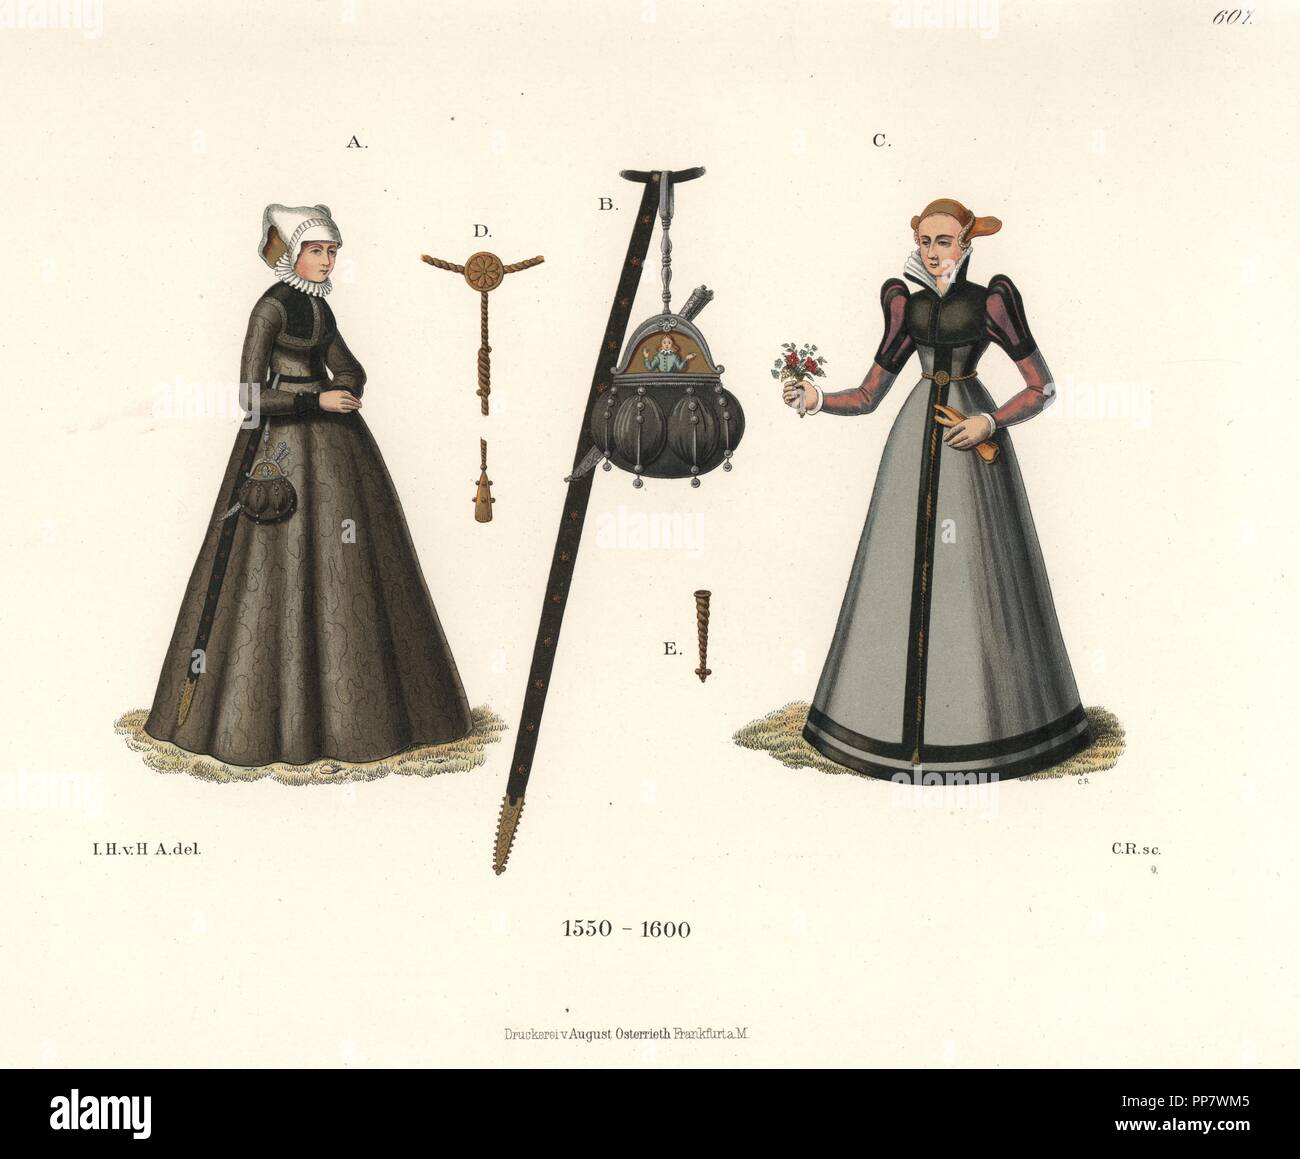 Craftswoman from Nuremberg with purse in the form of a castle with little man looking out, and woman from Cologne in golden girdle with bouquet of flowers, late 16th century. Chromolithograph from Hefner-Alteneck's Costumes, Artworks and Appliances from the Middle Ages to the 17th Century, Frankfurt, 1889. Illustration by Dr. Jakob Heinrich von Hefner-Alteneck, lithographed by C. Regnier. Dr. Hefner-Alteneck (1811-1903) was a German museum curator, archaeologist, art historian, illustrator and etcher. Stock Photo